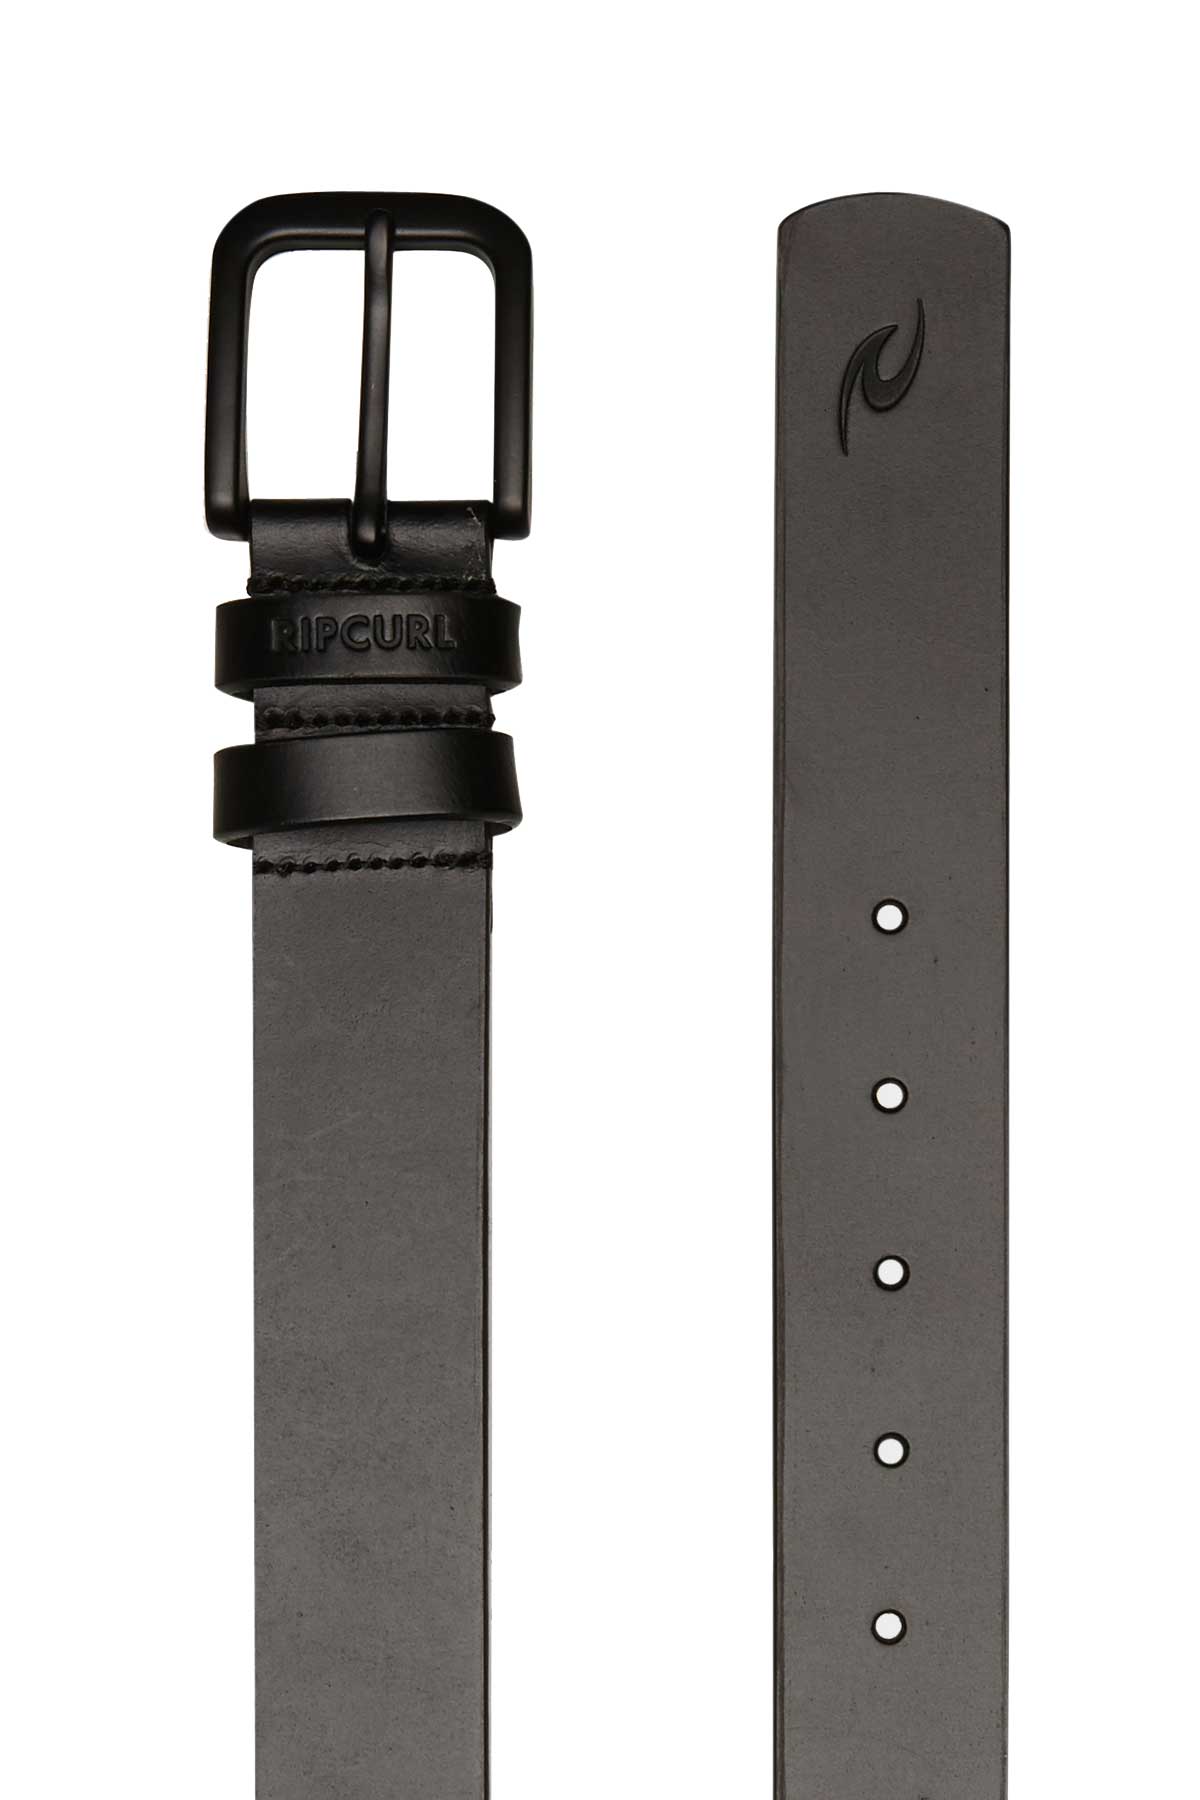 Rip Curl Mens Leather Belt - Cut Down in black showing both ends